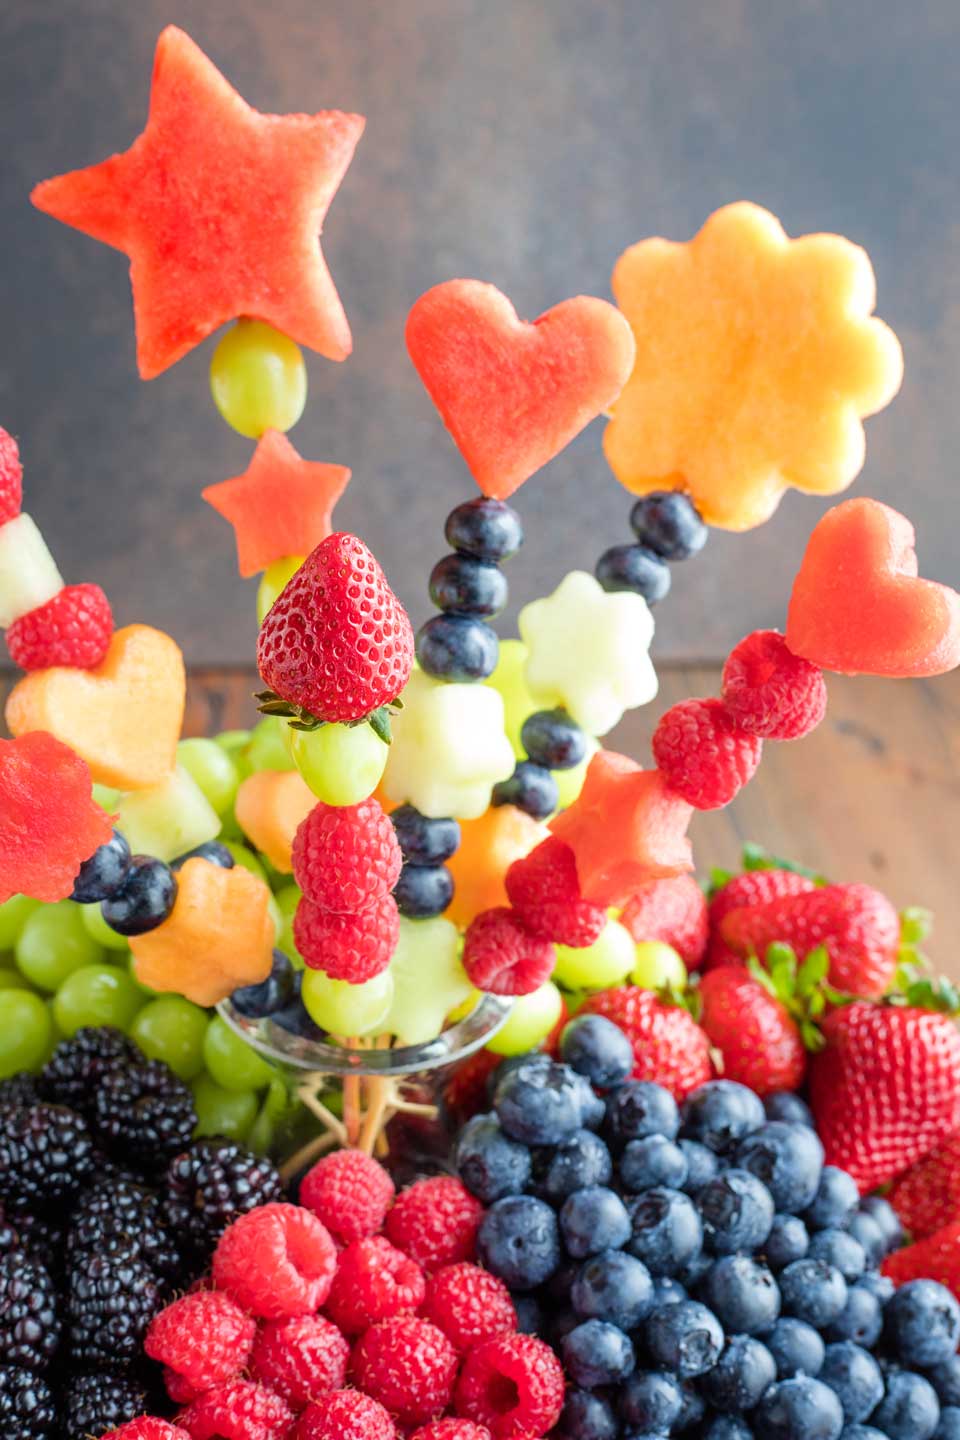 Closeup of a fruit bouquet in the middle of a fruit tray.